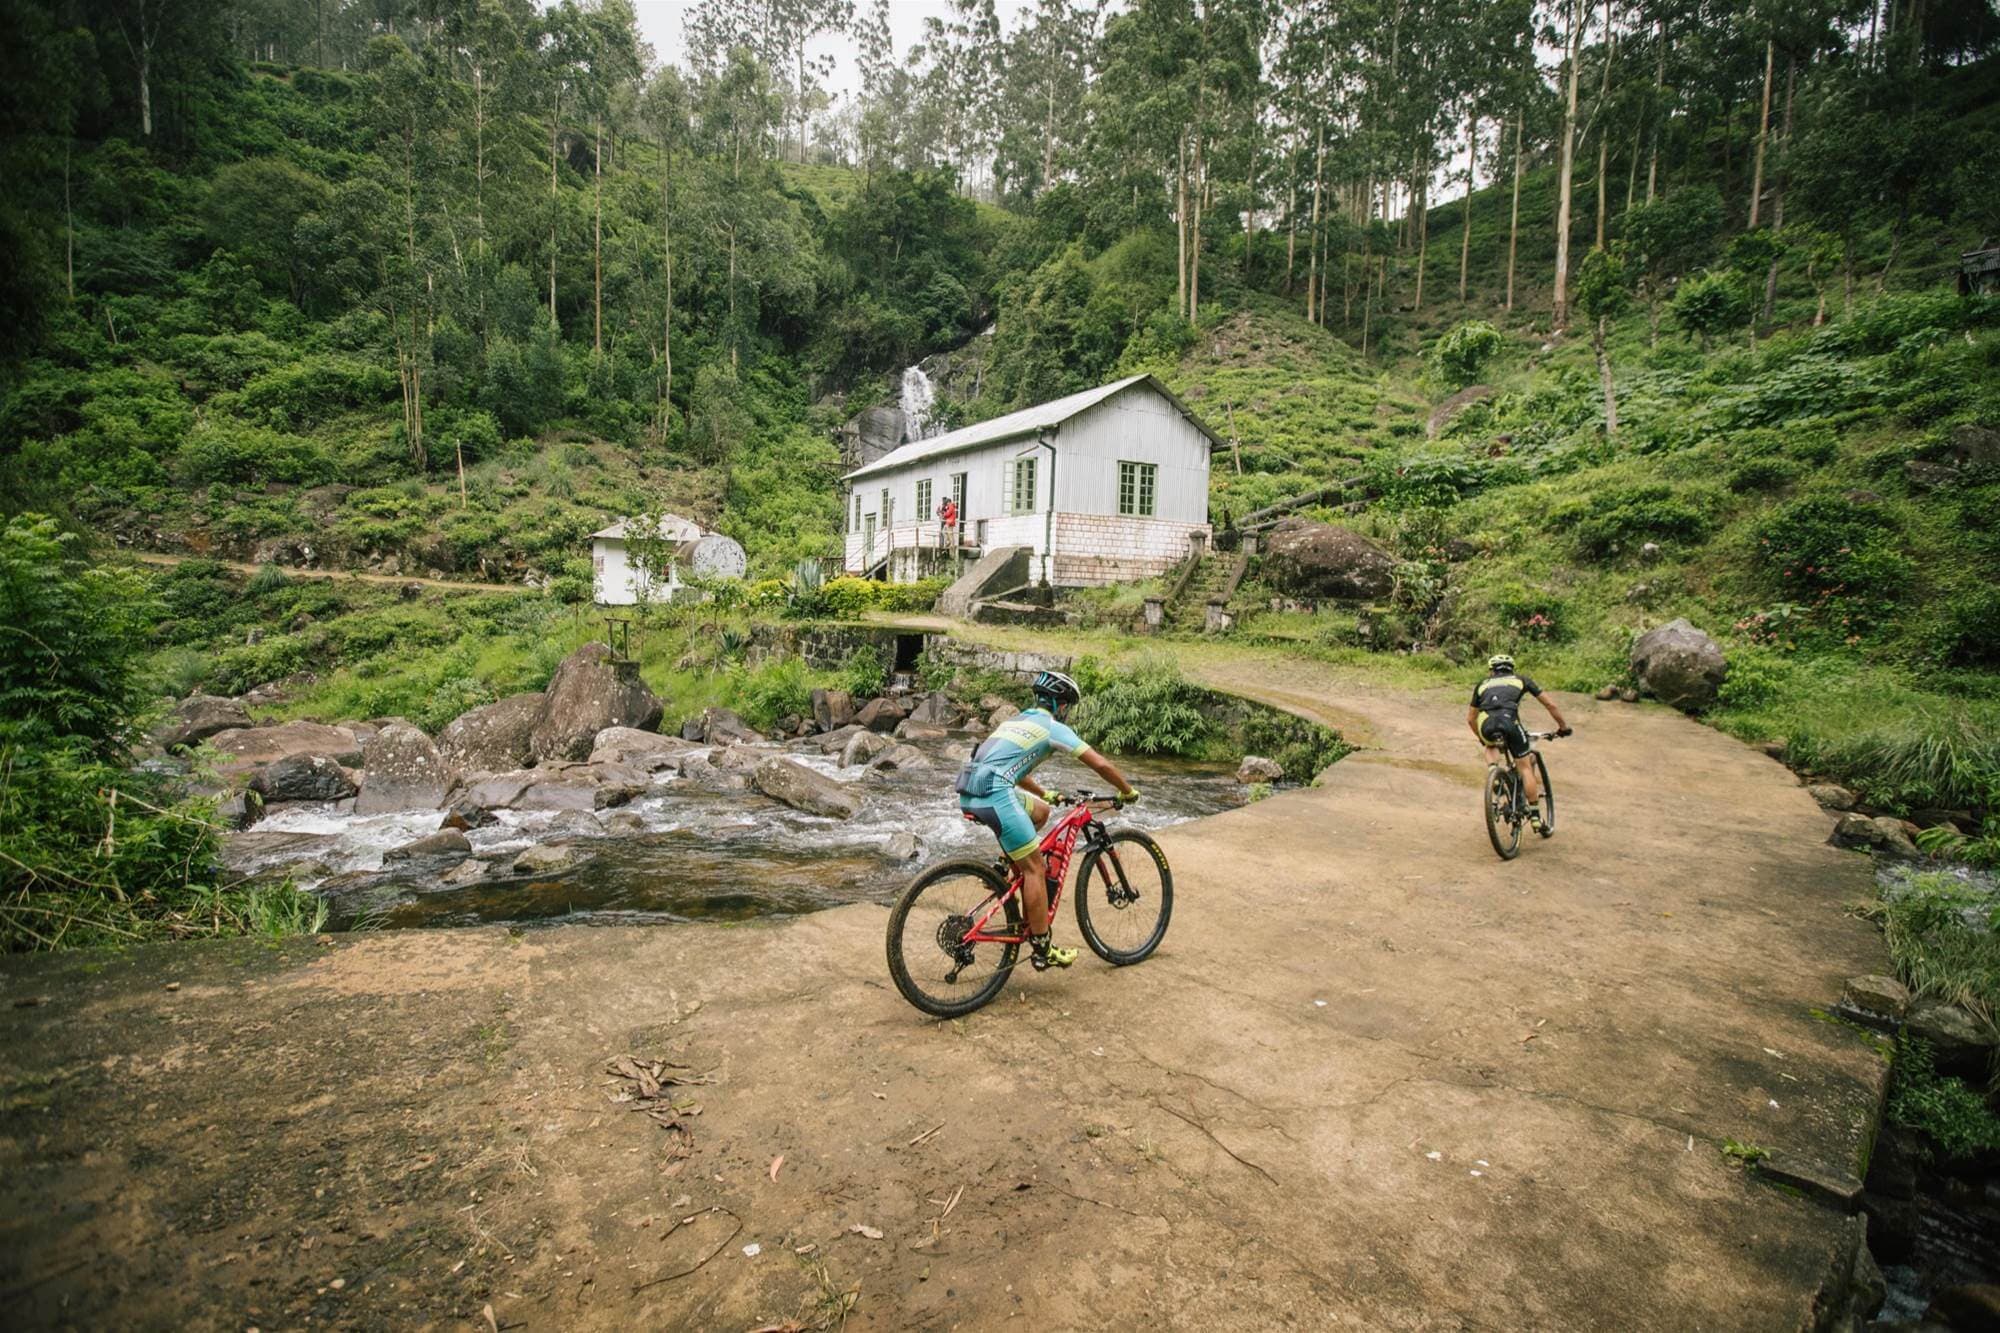 The cyclists cycling through Kithulgala countryside in Sri Lanka